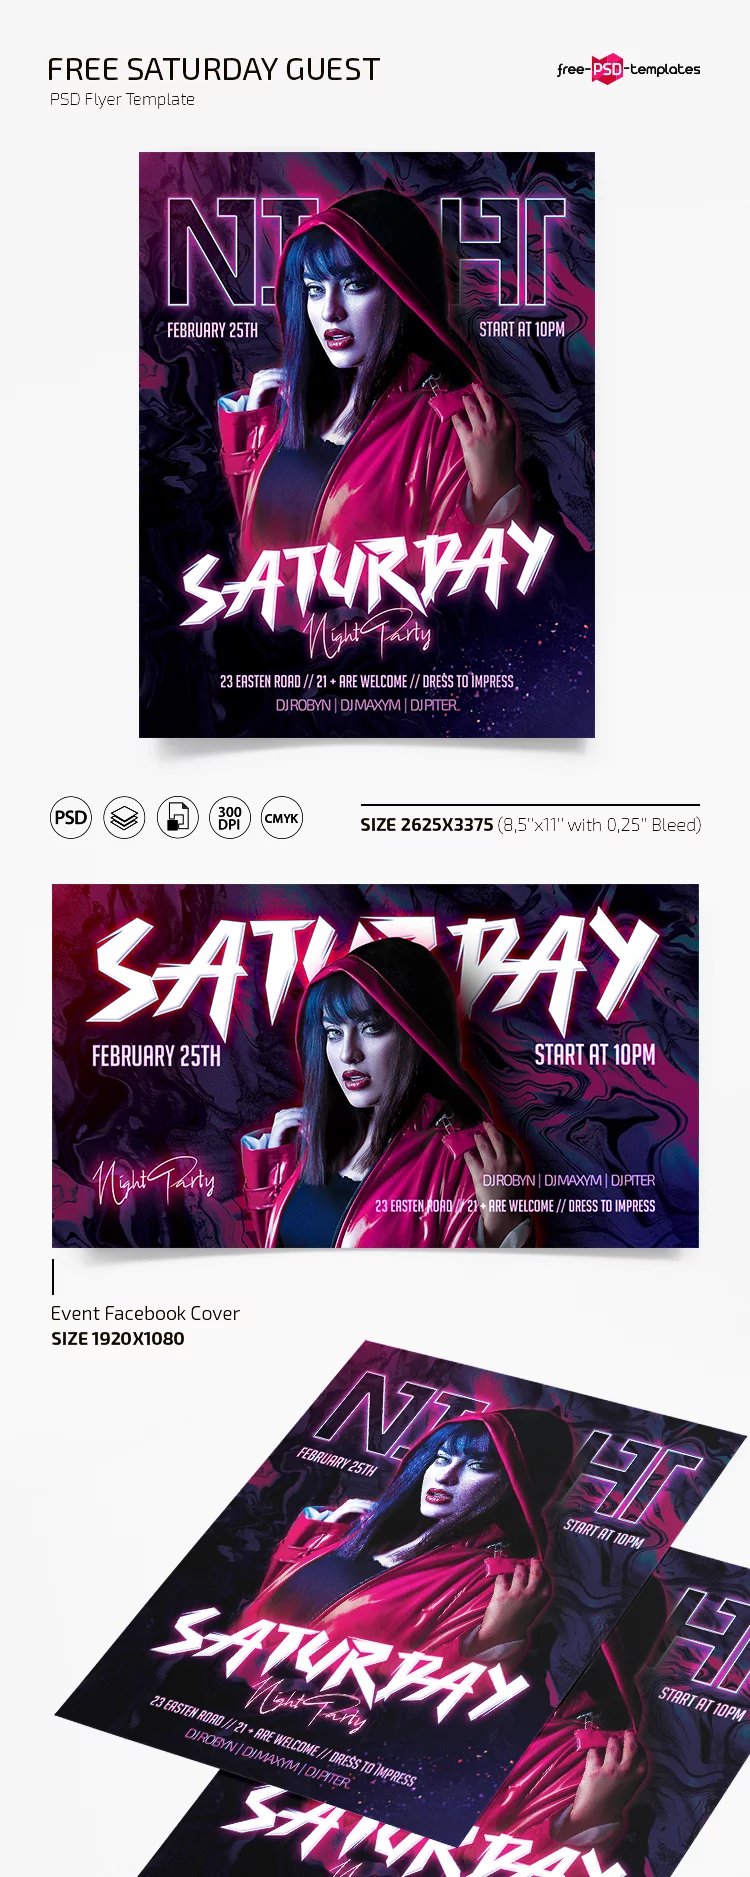 Free Saturday Party Flyer Template in PSD